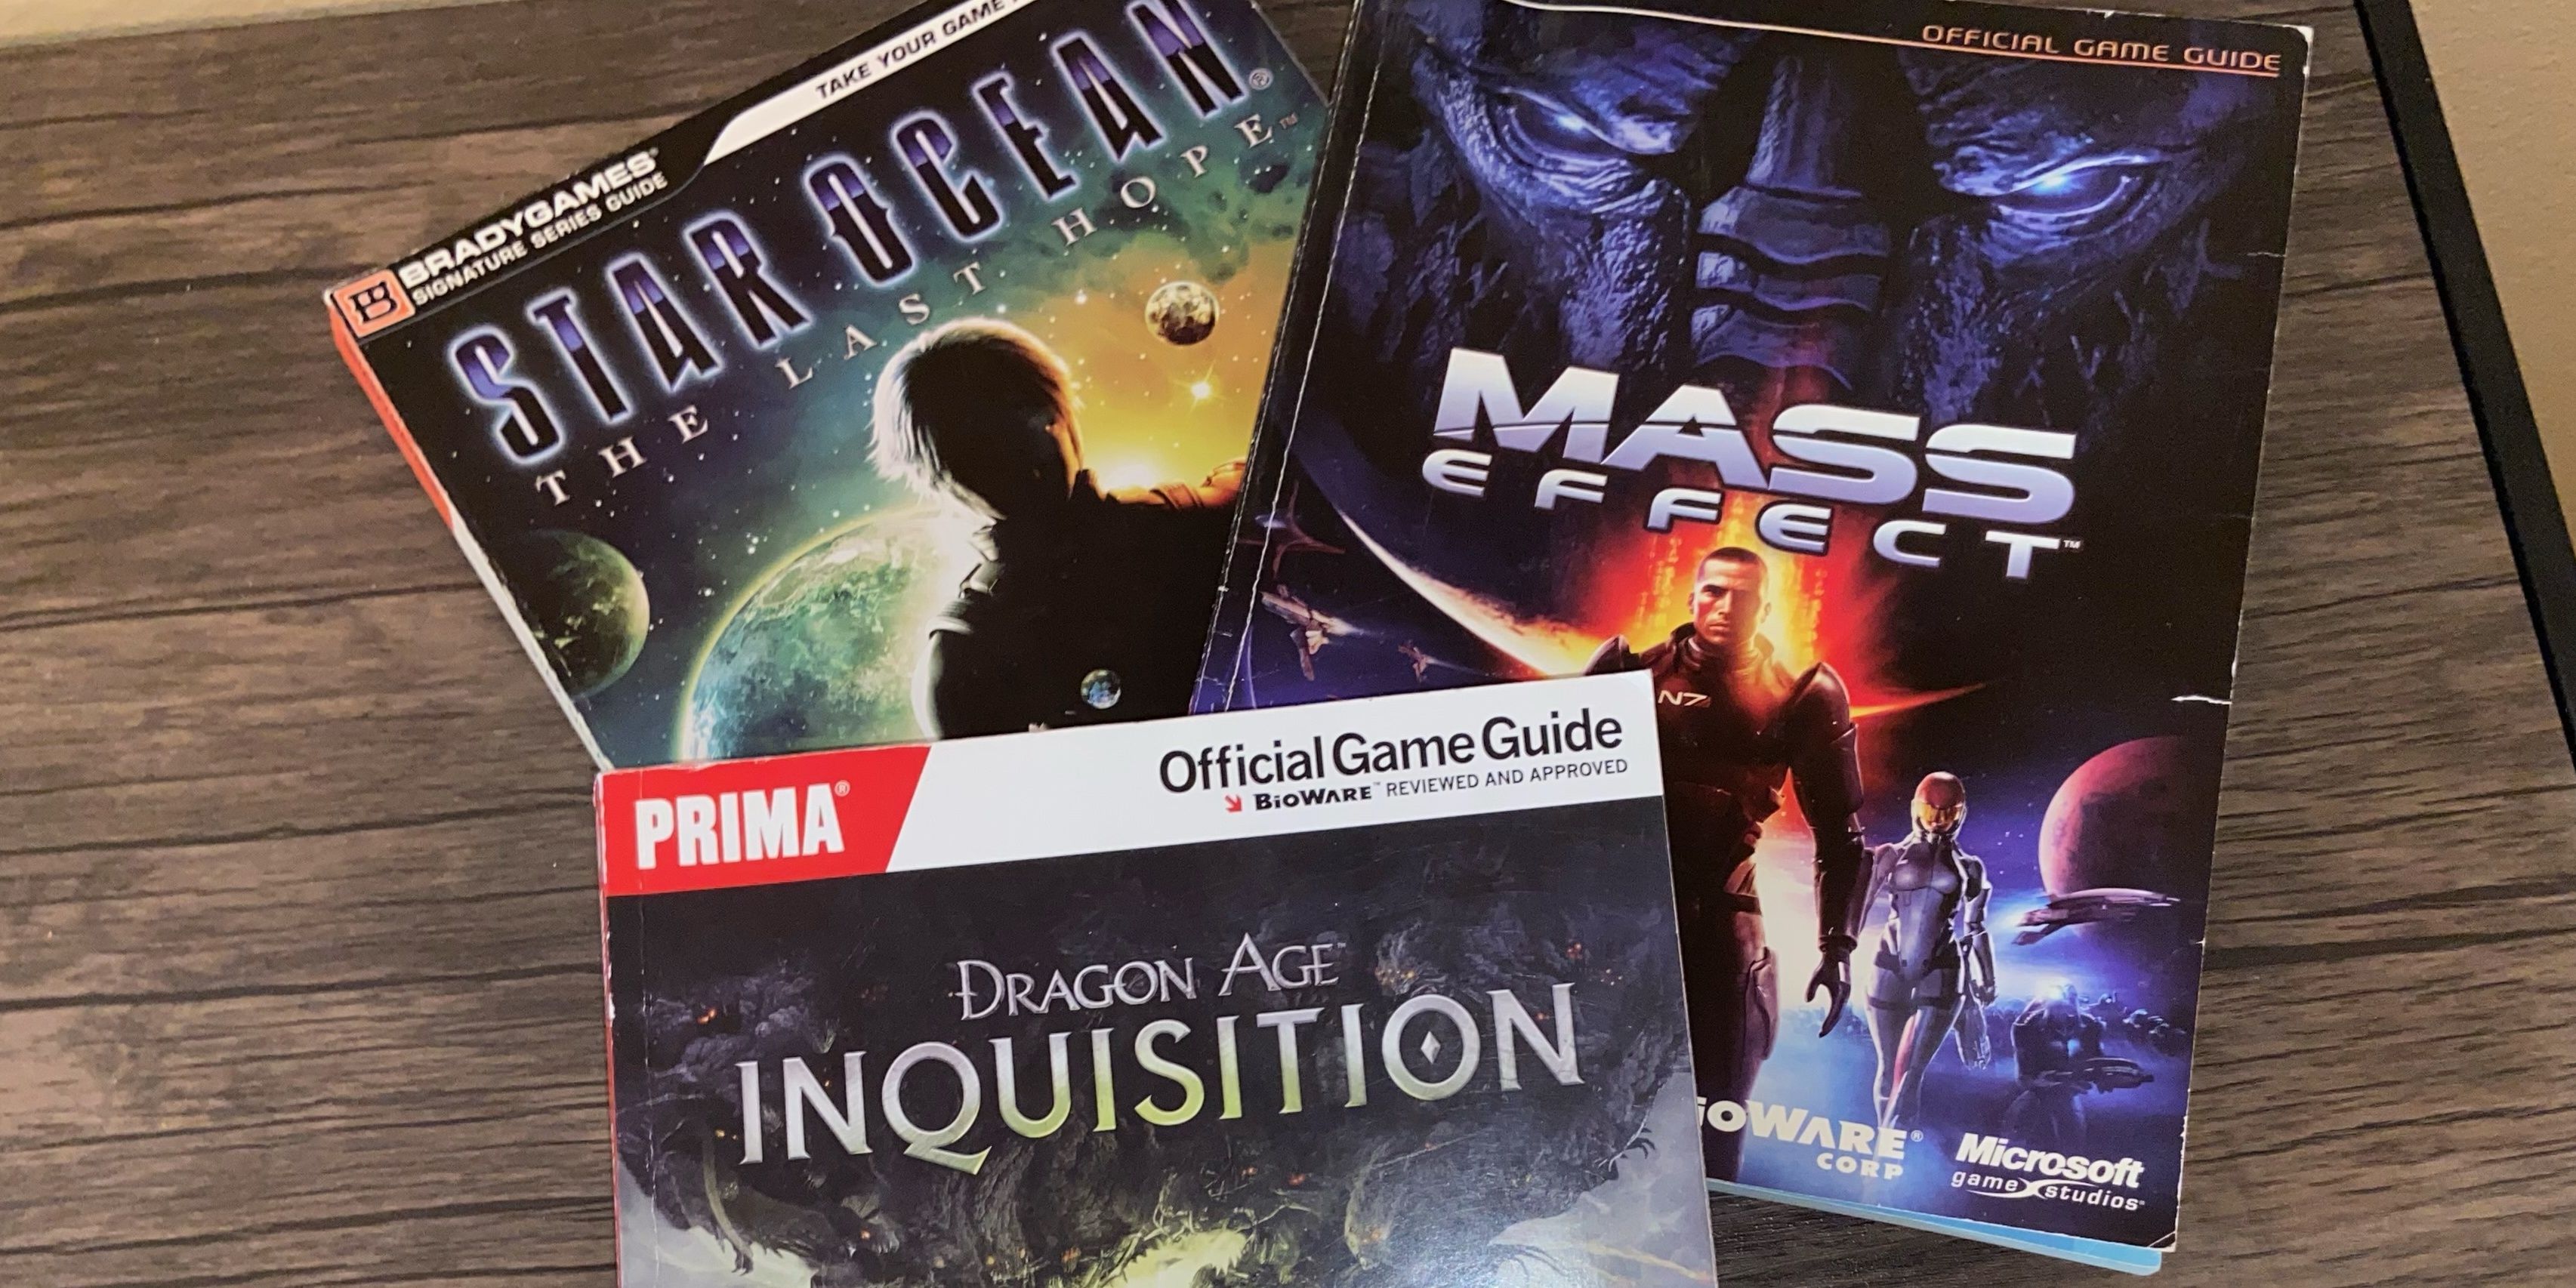 Dragon Age Inquisition, Star Ocean The Last Hope, and Mass Effect strategy guides